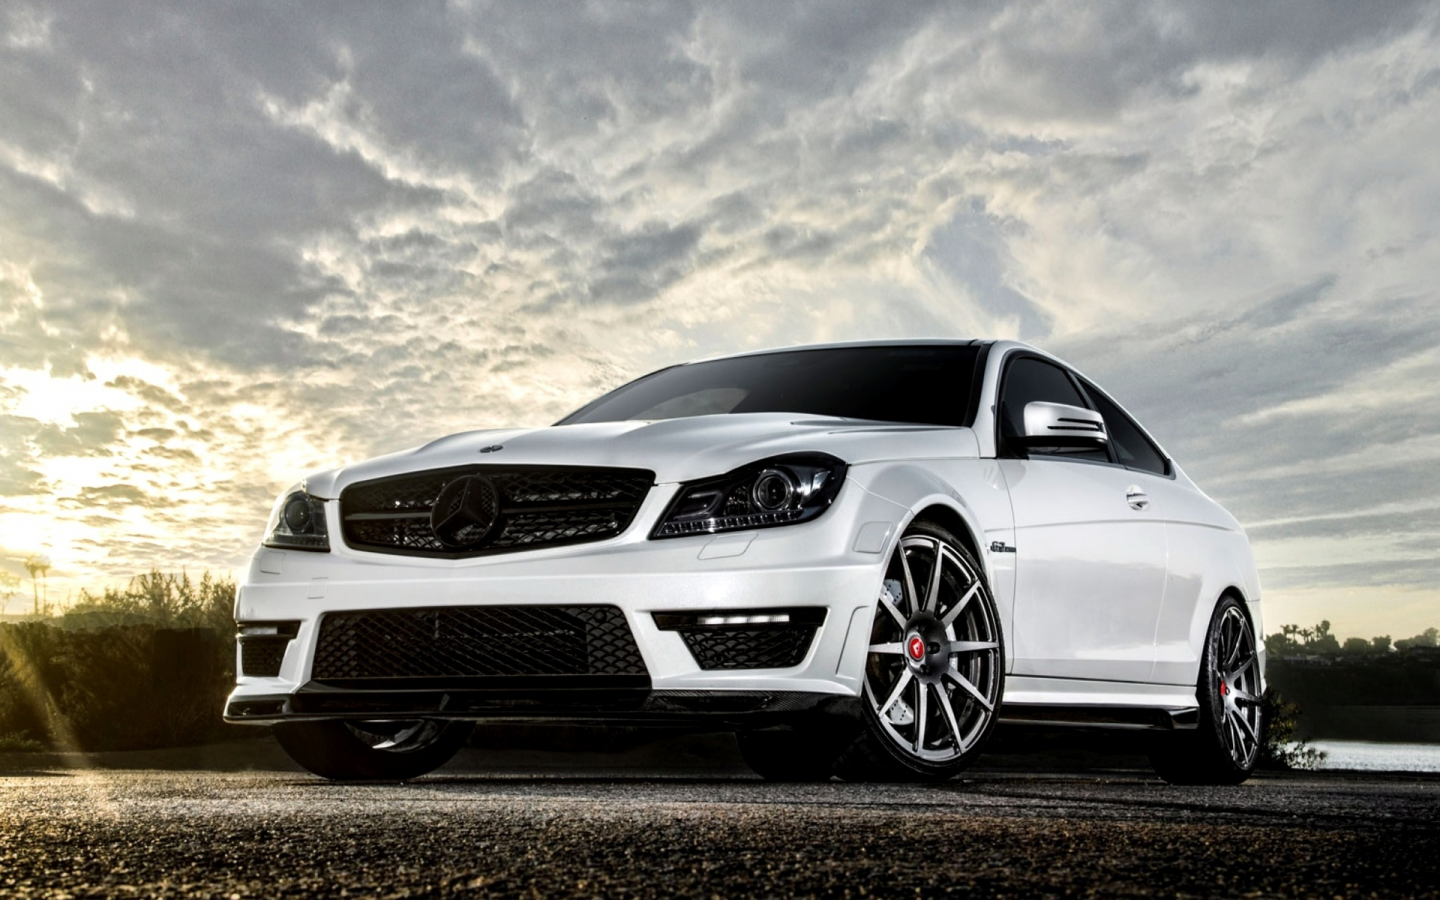 benz, vorsteiner, c63, Car, tuning, wallpapers, 2012, white, amg, beautiful, new, mercedes, coupe